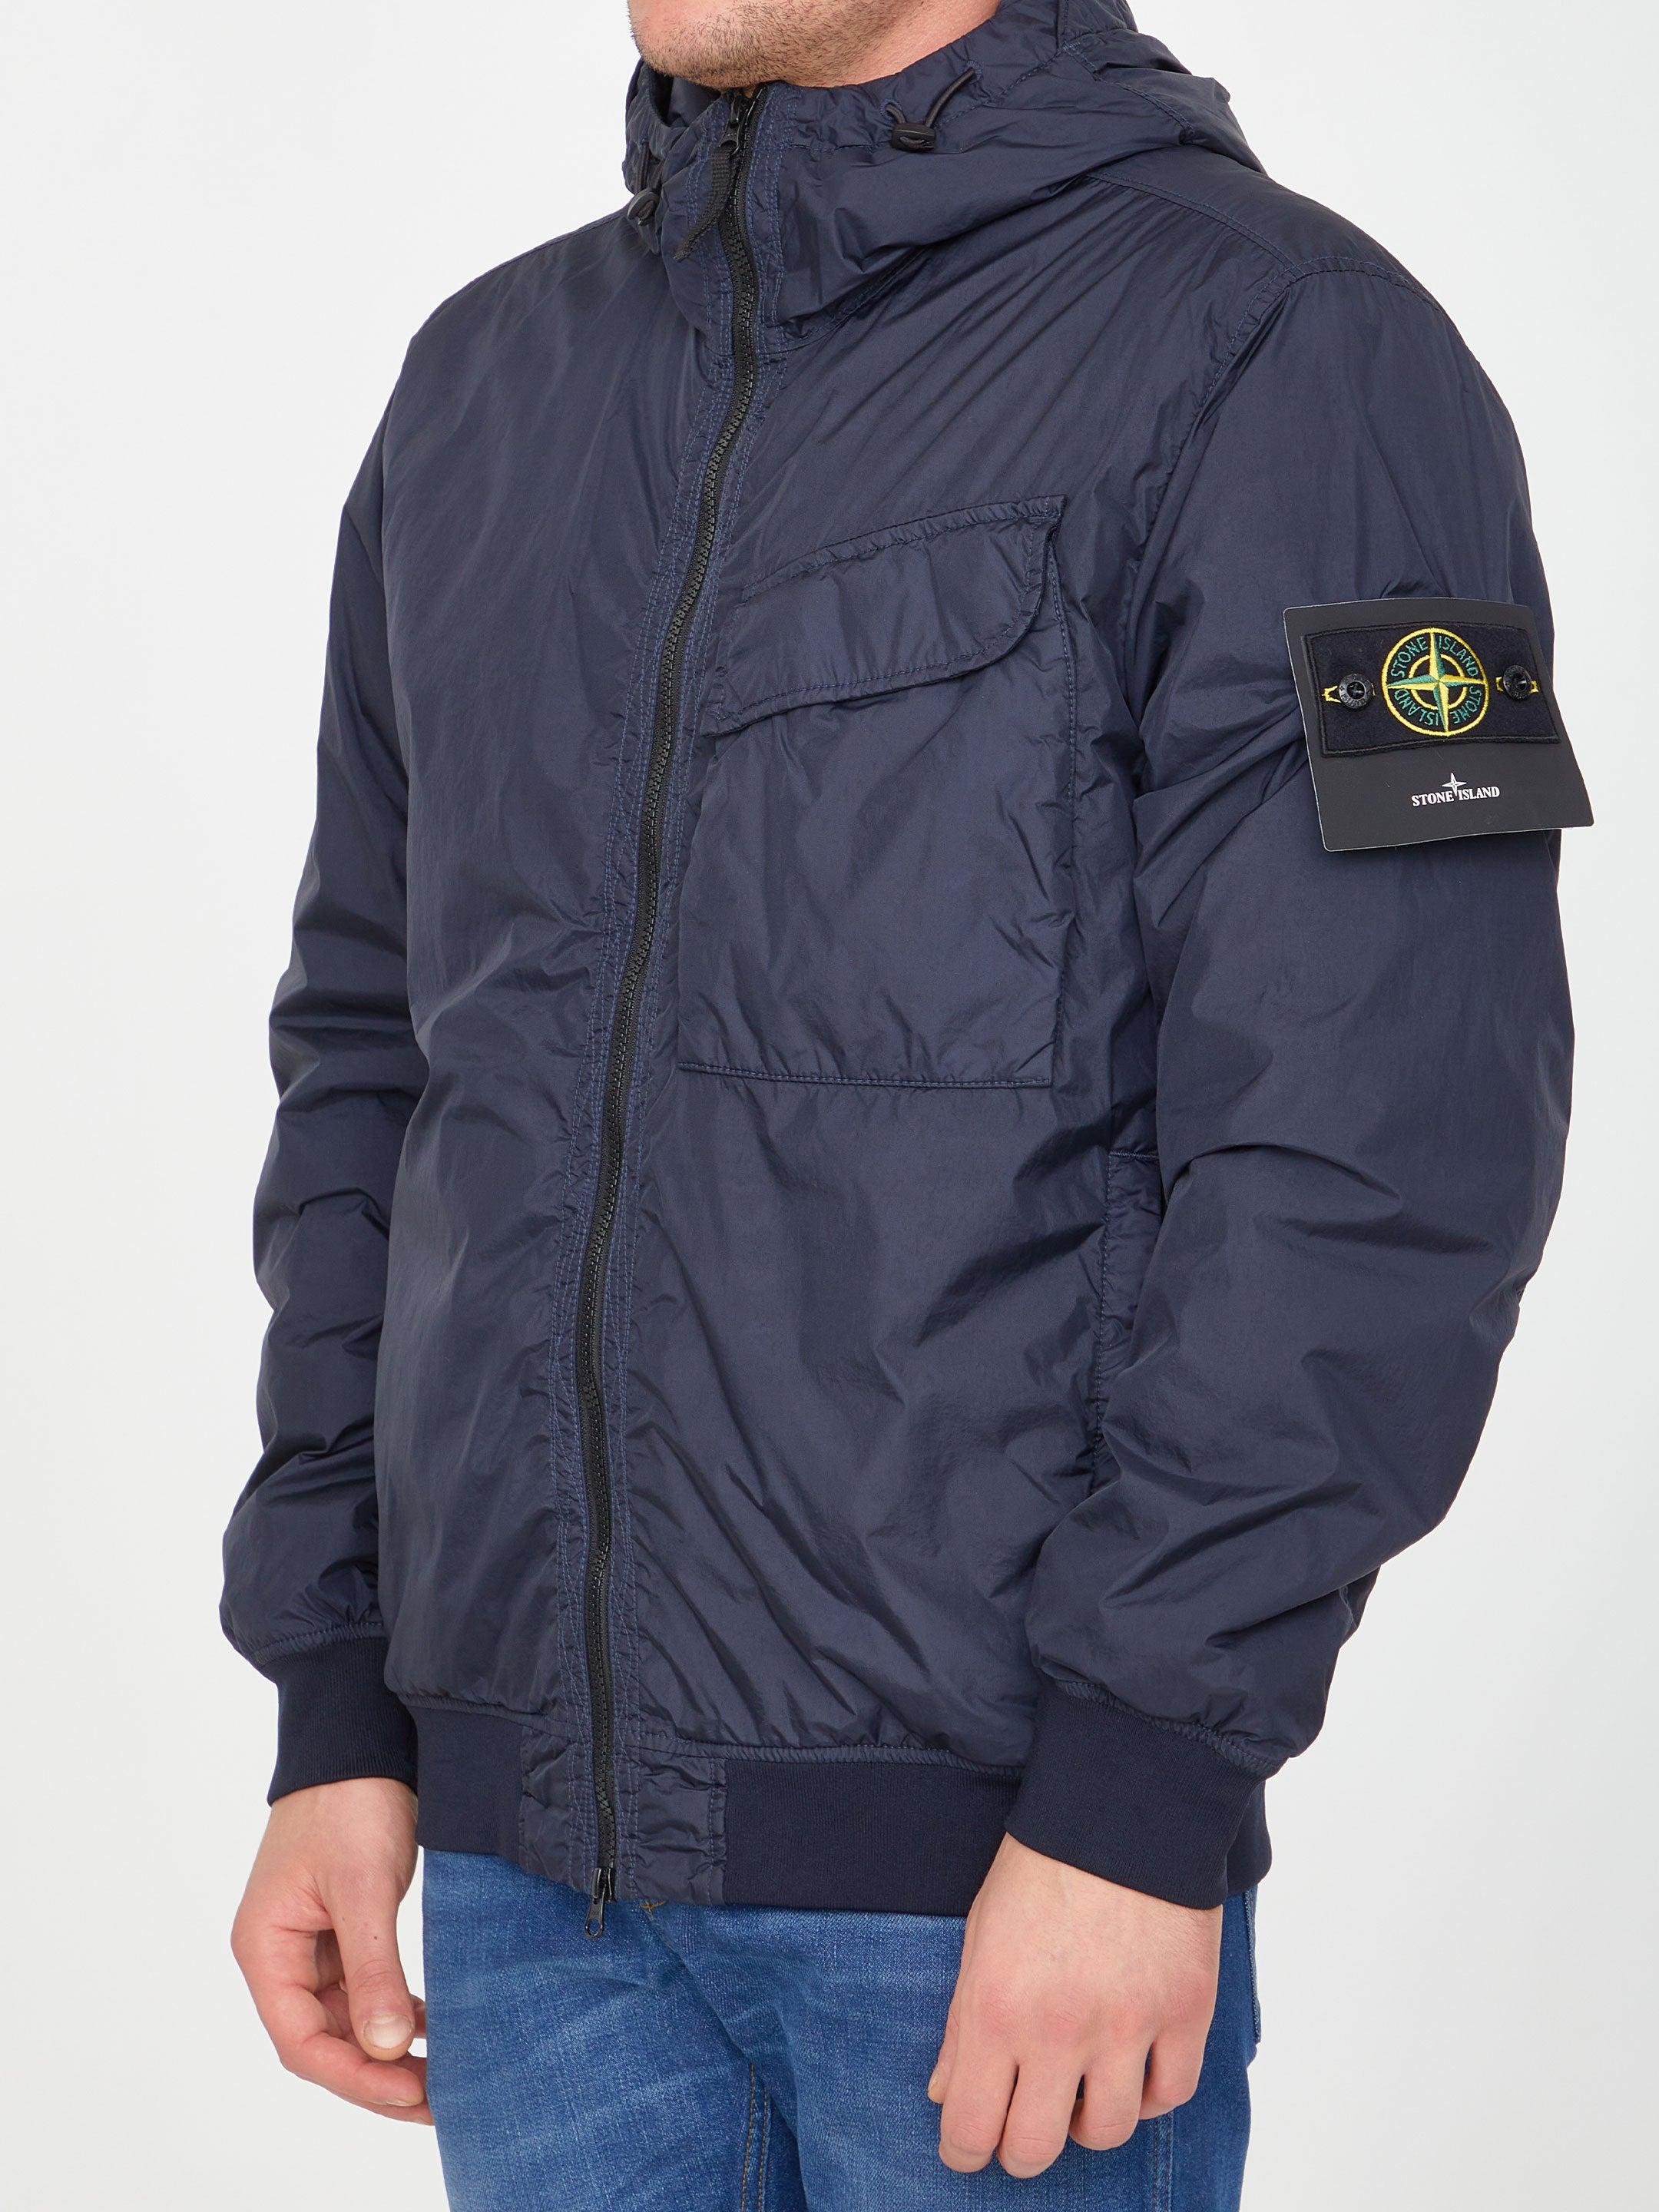 Stone Island Jacket in Blue for Men Mens Jackets Stone Island Jackets 